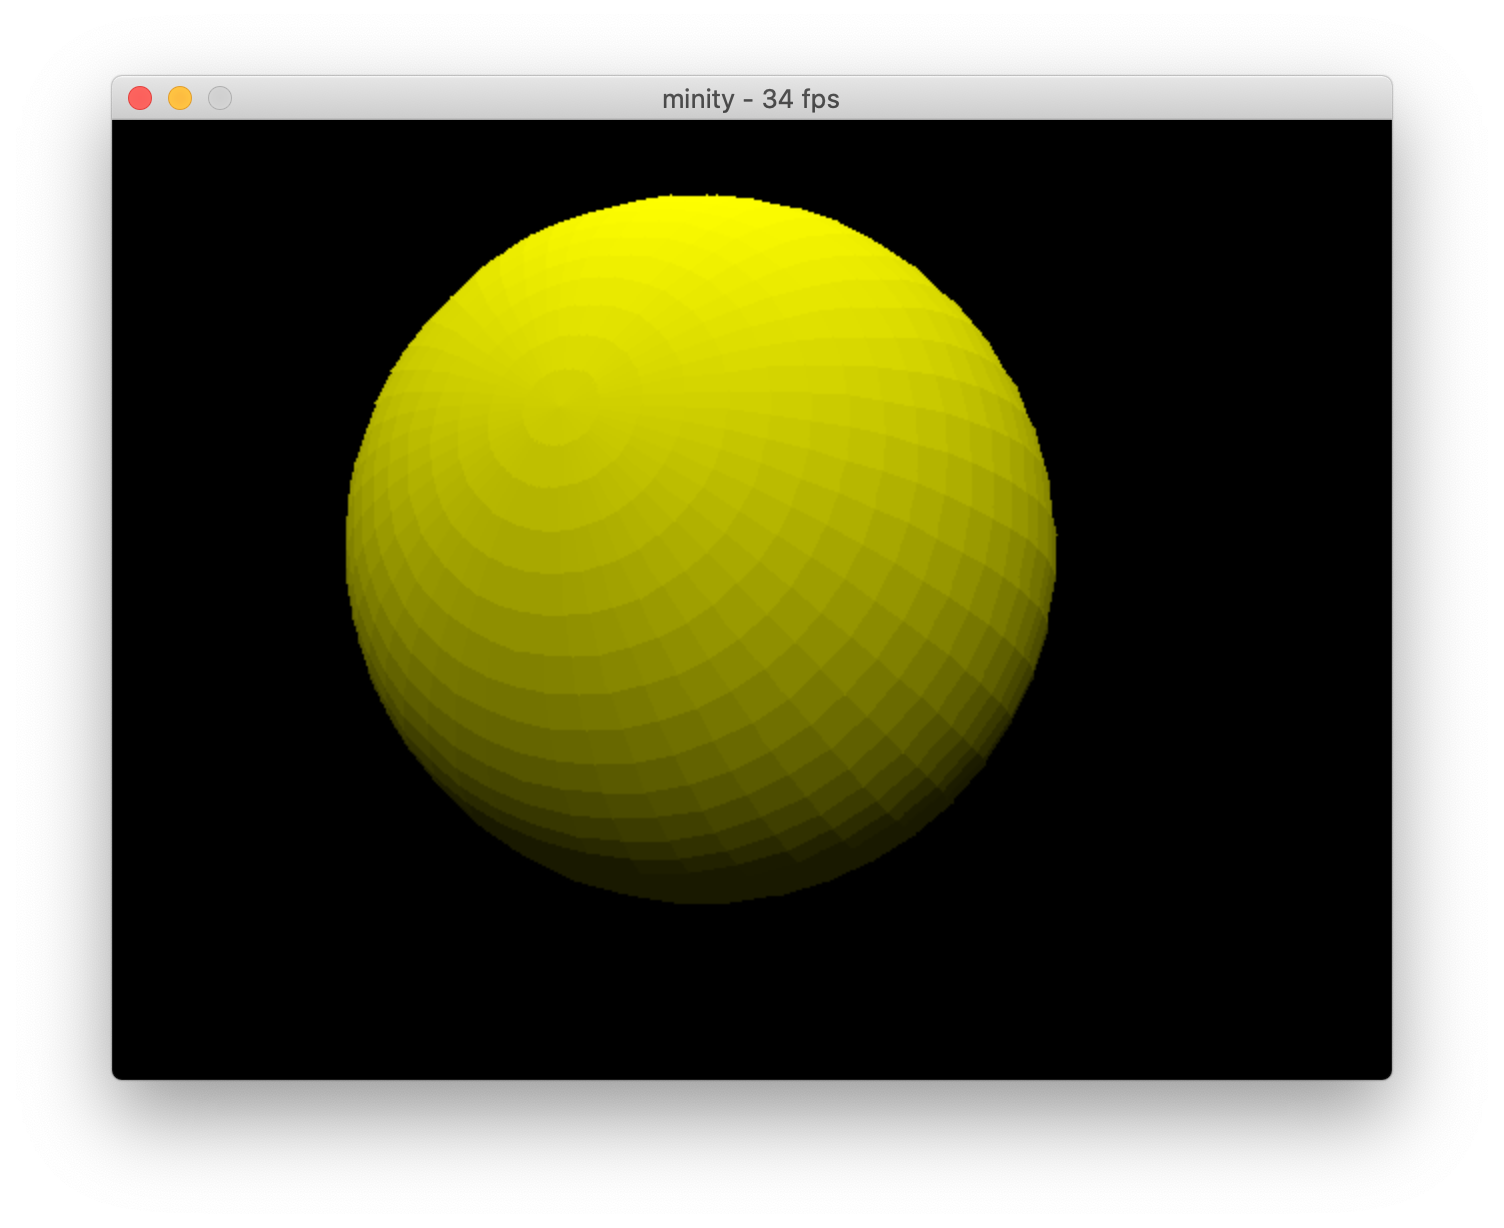 Minity showing a yellow sphere